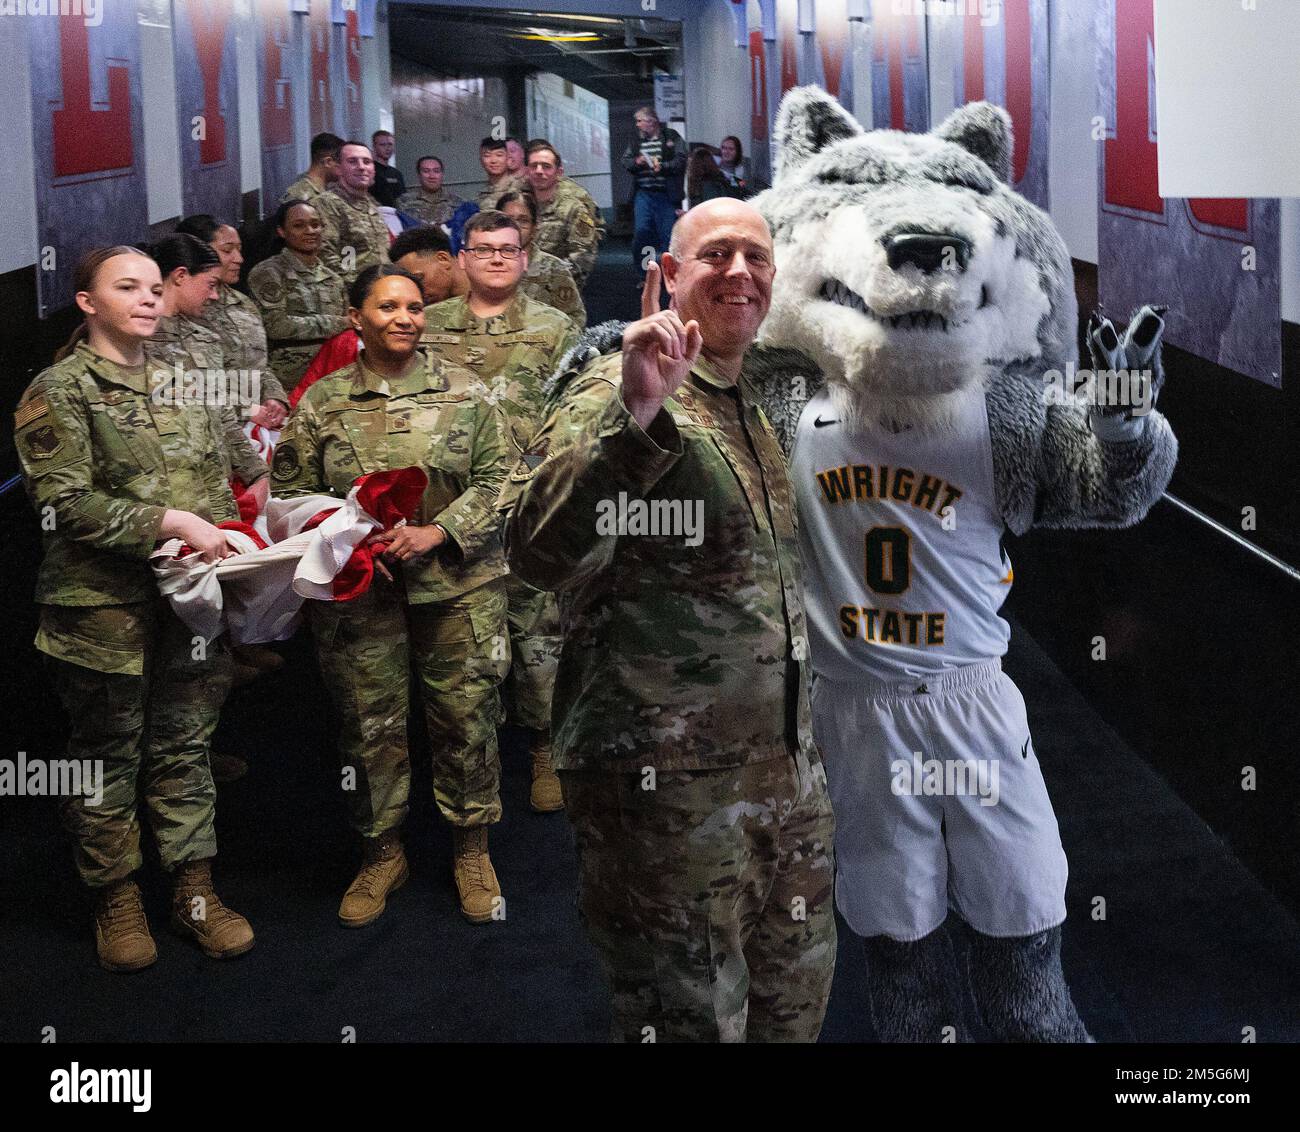 Wright State mascot Rowdy Raider and Col. Patrick Miller, 88th Air Base Wing and Wright-Patterson Air Force Base commander, pose with Airmen on March 16, 2022, before they carried a large American flag out onto the floor of University of Dayton Arena for the opening ceremony of the NCAA men’s basketball tournament game between Wright State and Bryant. Wright State, a hometown team whose campus borders Wright-Patterson, went on to win the game and advance to the next round of tournament play. Stock Photo